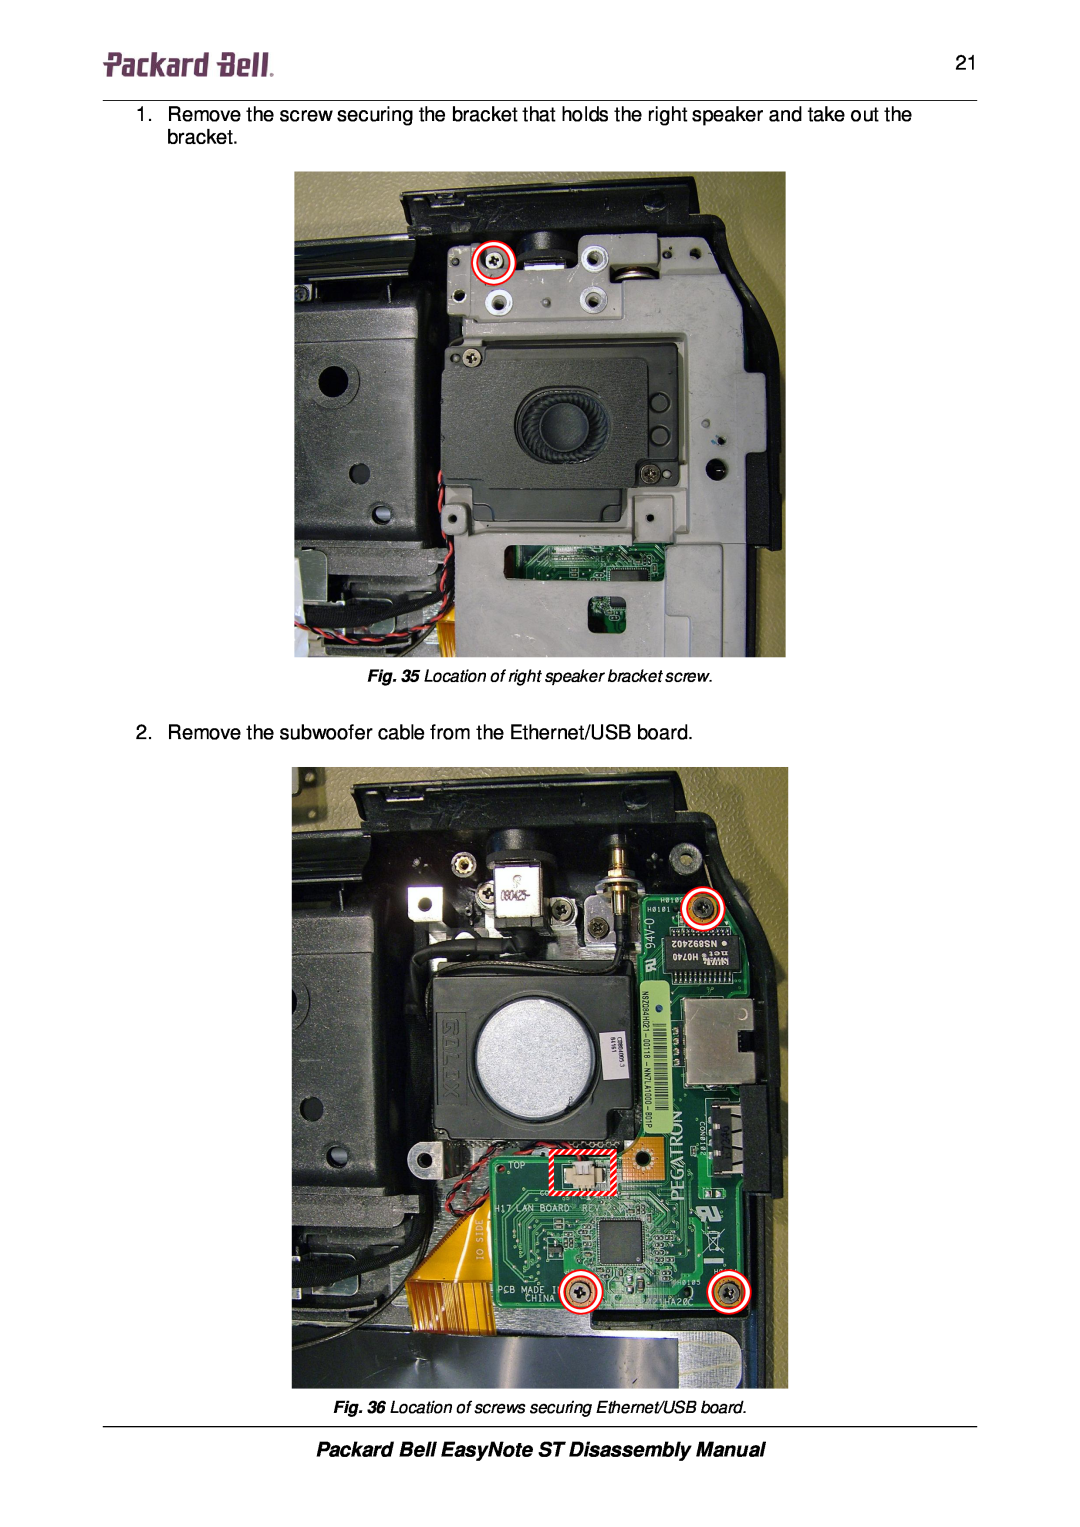 Packard Bell ST manual 2121212121, Remove the subwoofer cable from the Ethernet/USB board 